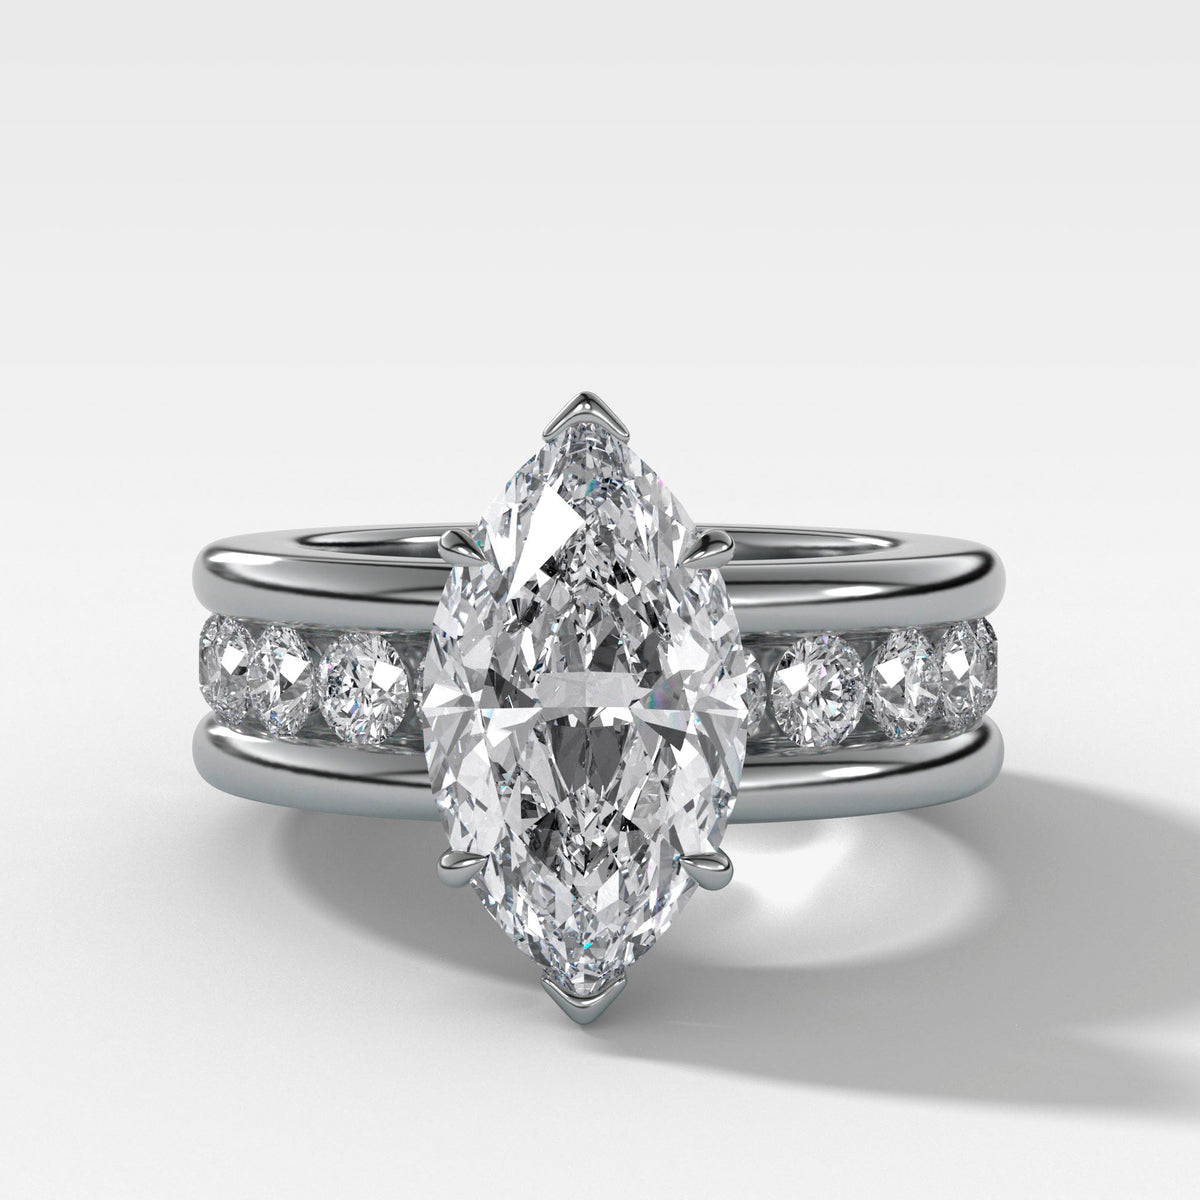 Chunky Channel Set Engagement Ring with Marquise Cut Diamond